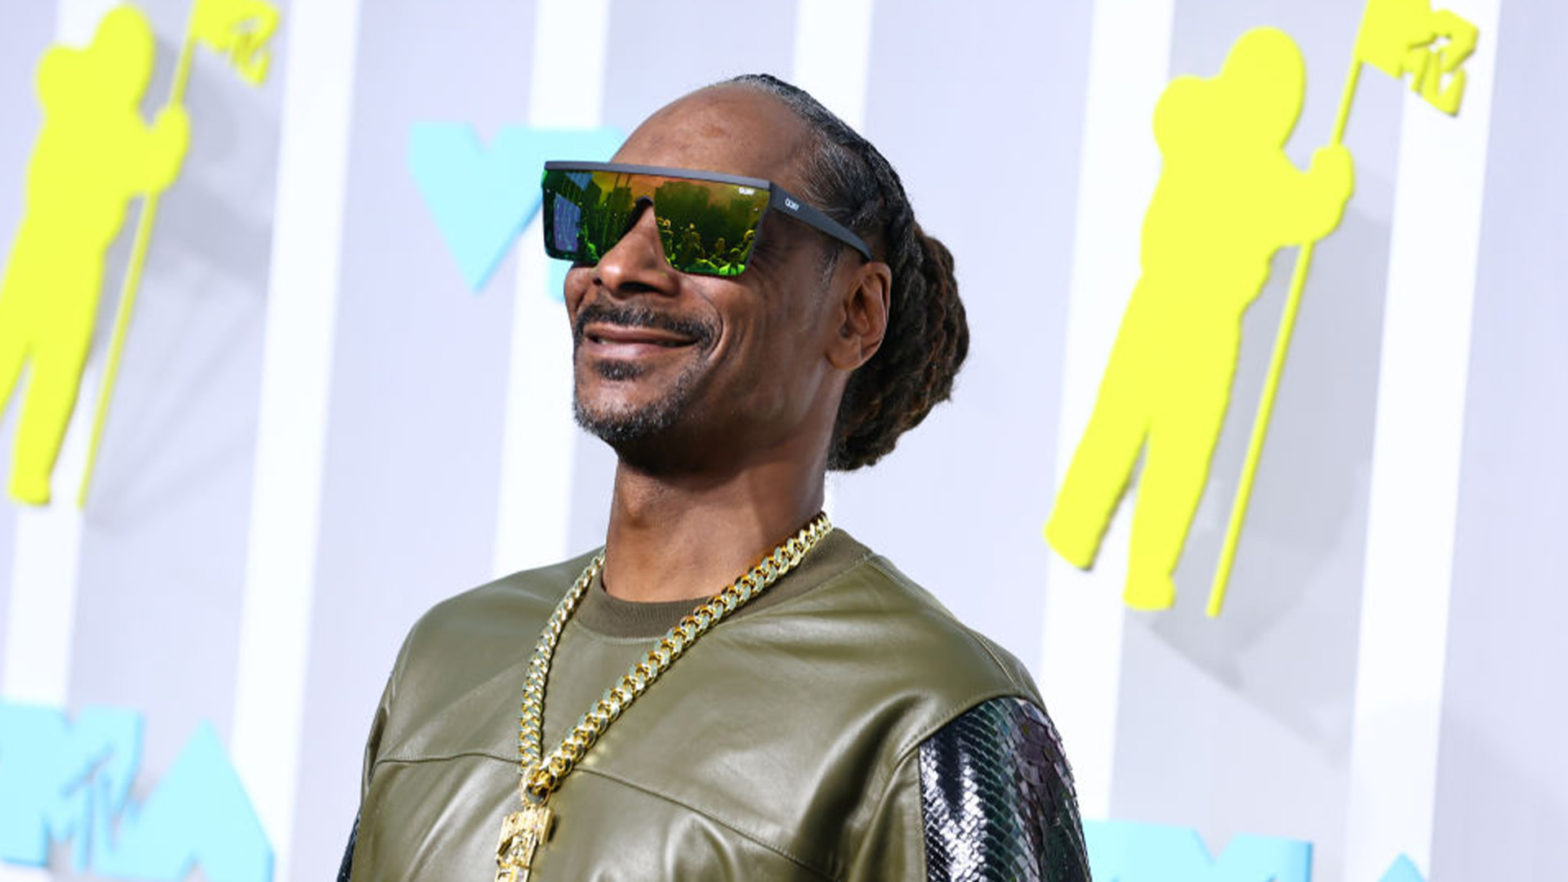 Snoop Dogg's Death Row Records Set To Launch Its Own Cannabis Brand